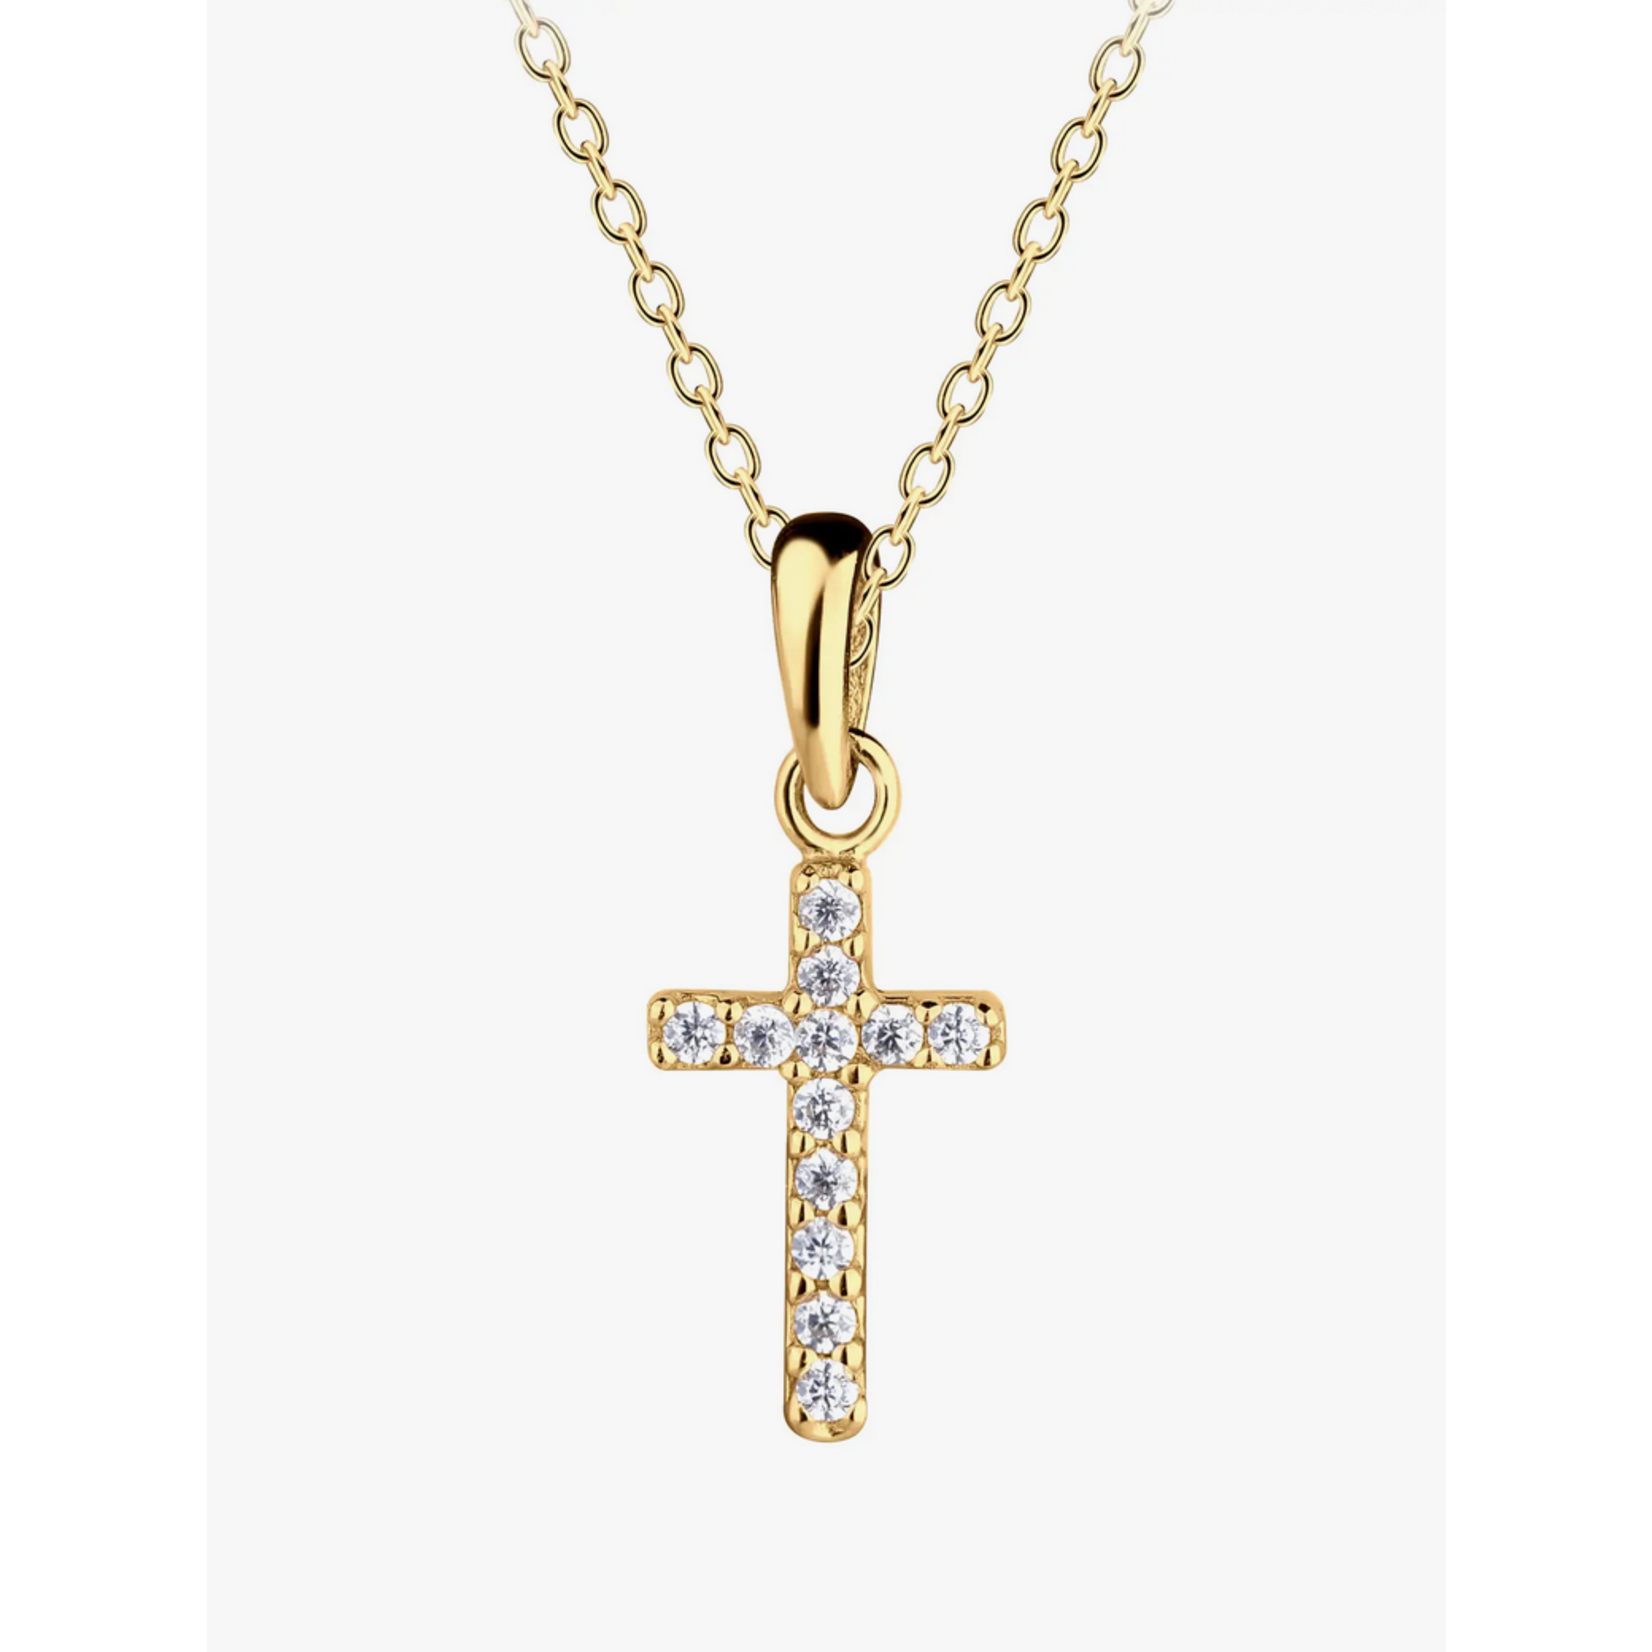 CHERISHED MOMENTS 14K GOLD-PLATED CROSS CZ NECKLACE